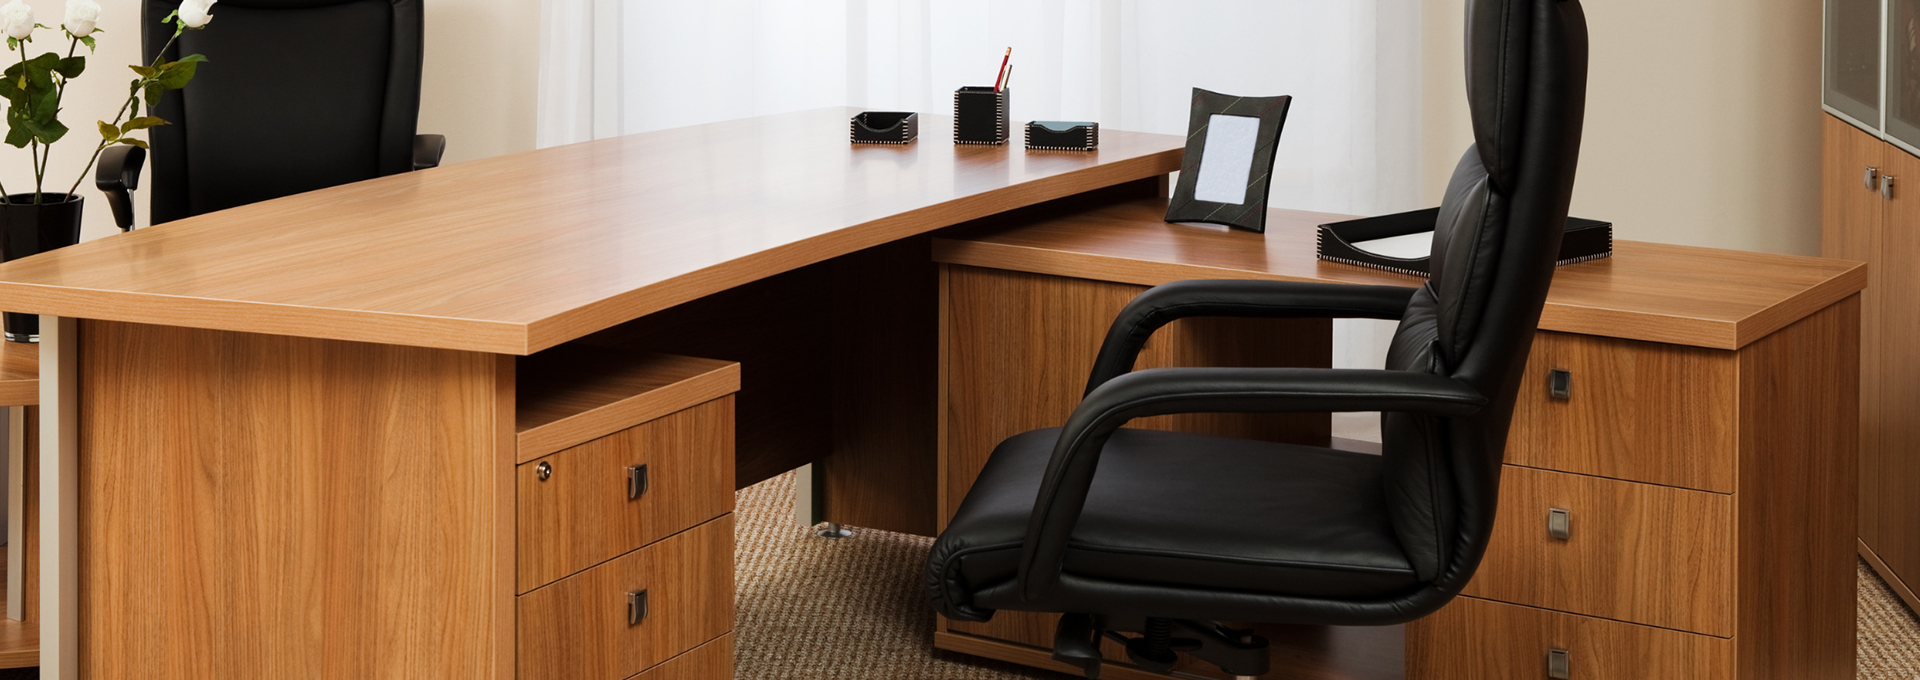 ability to provide office furniture all dimensions